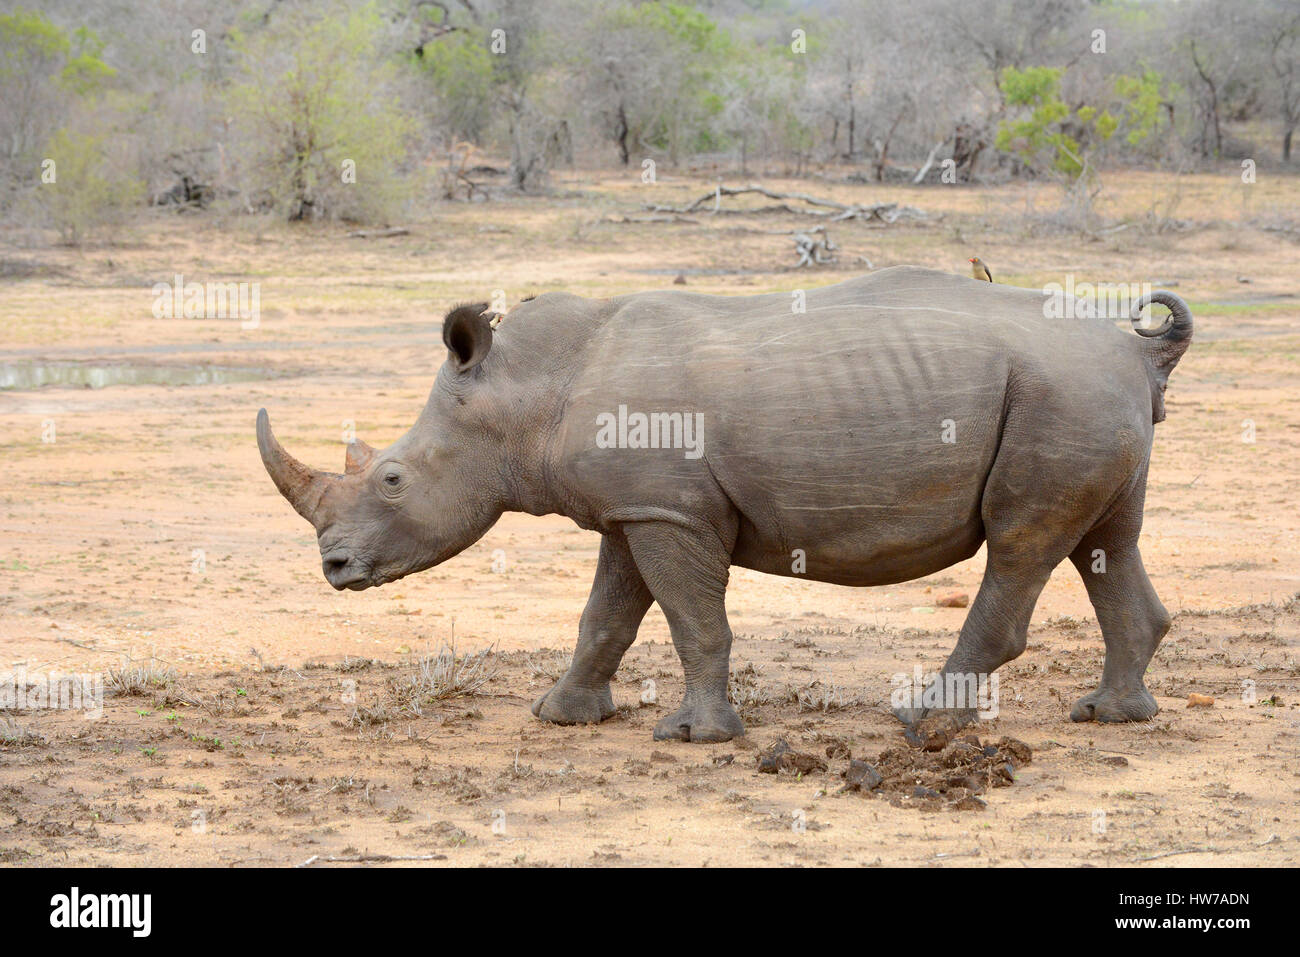 Large Rhinoceros in Kruger National Park in South Africa whose horns are subject to poaching and making the animal endangered. Stock Photo